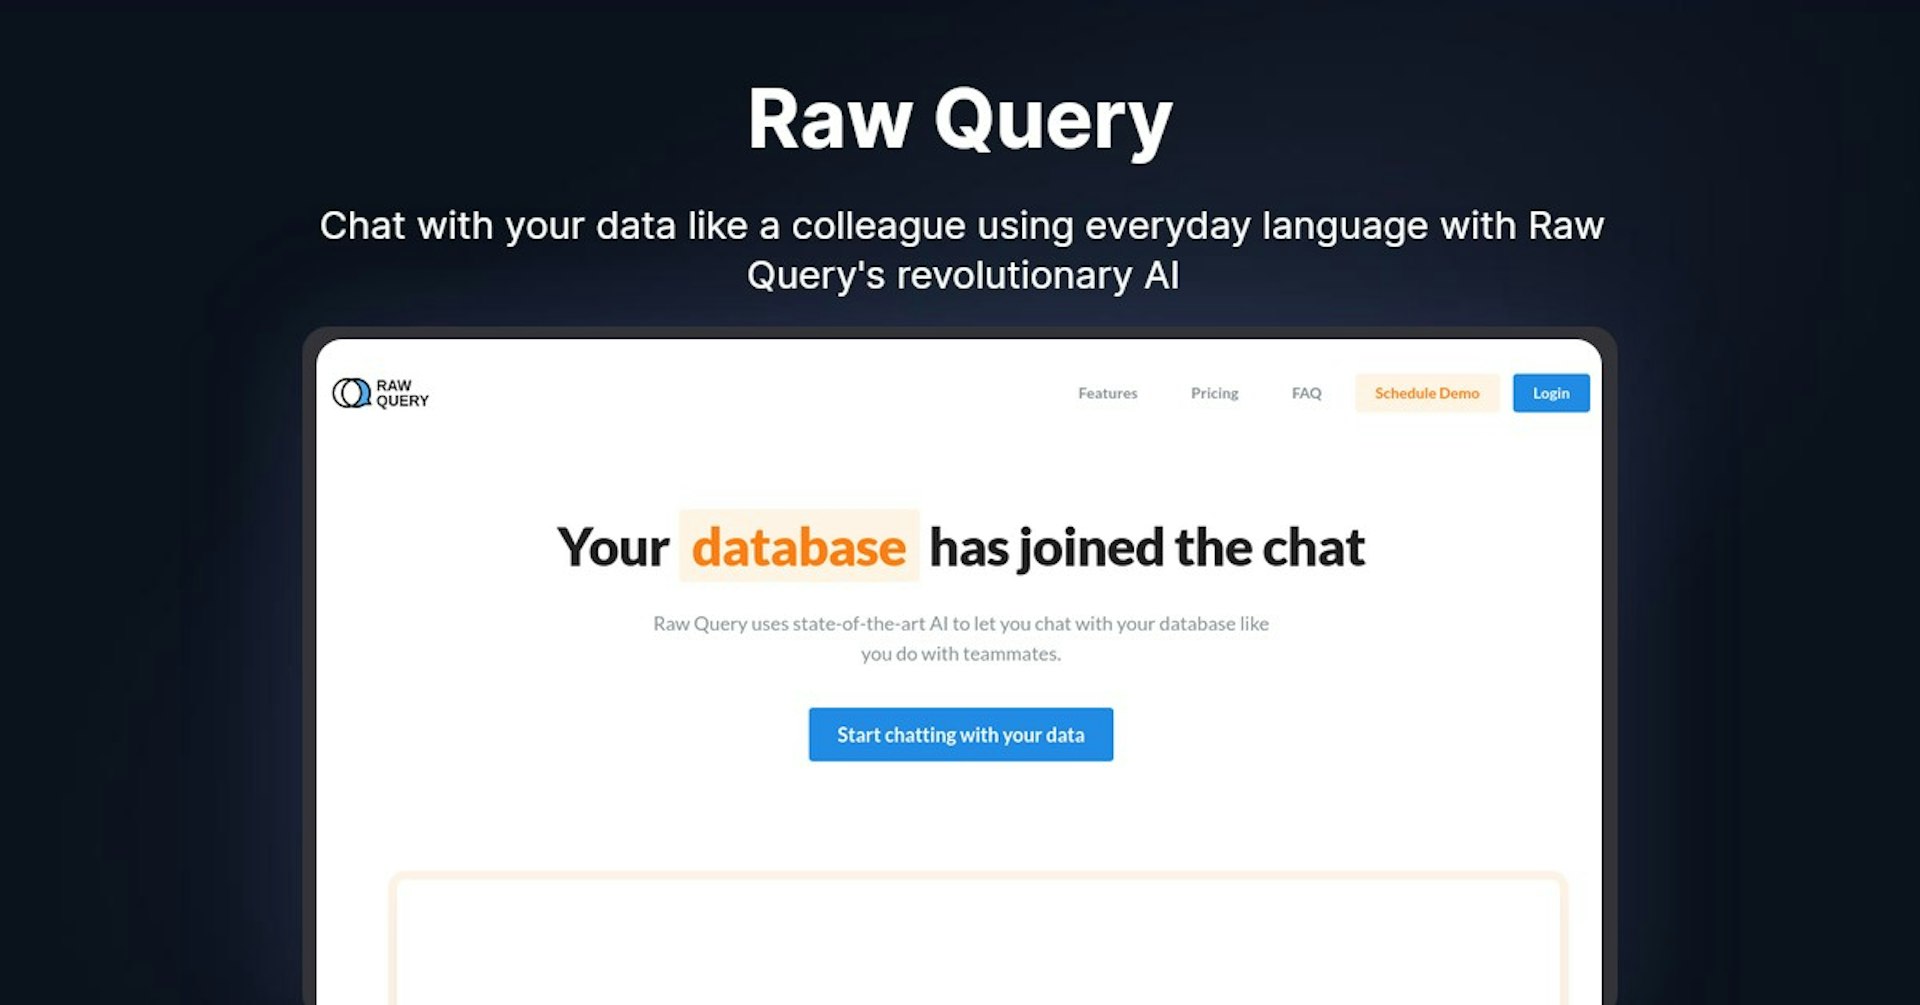 Raw Query